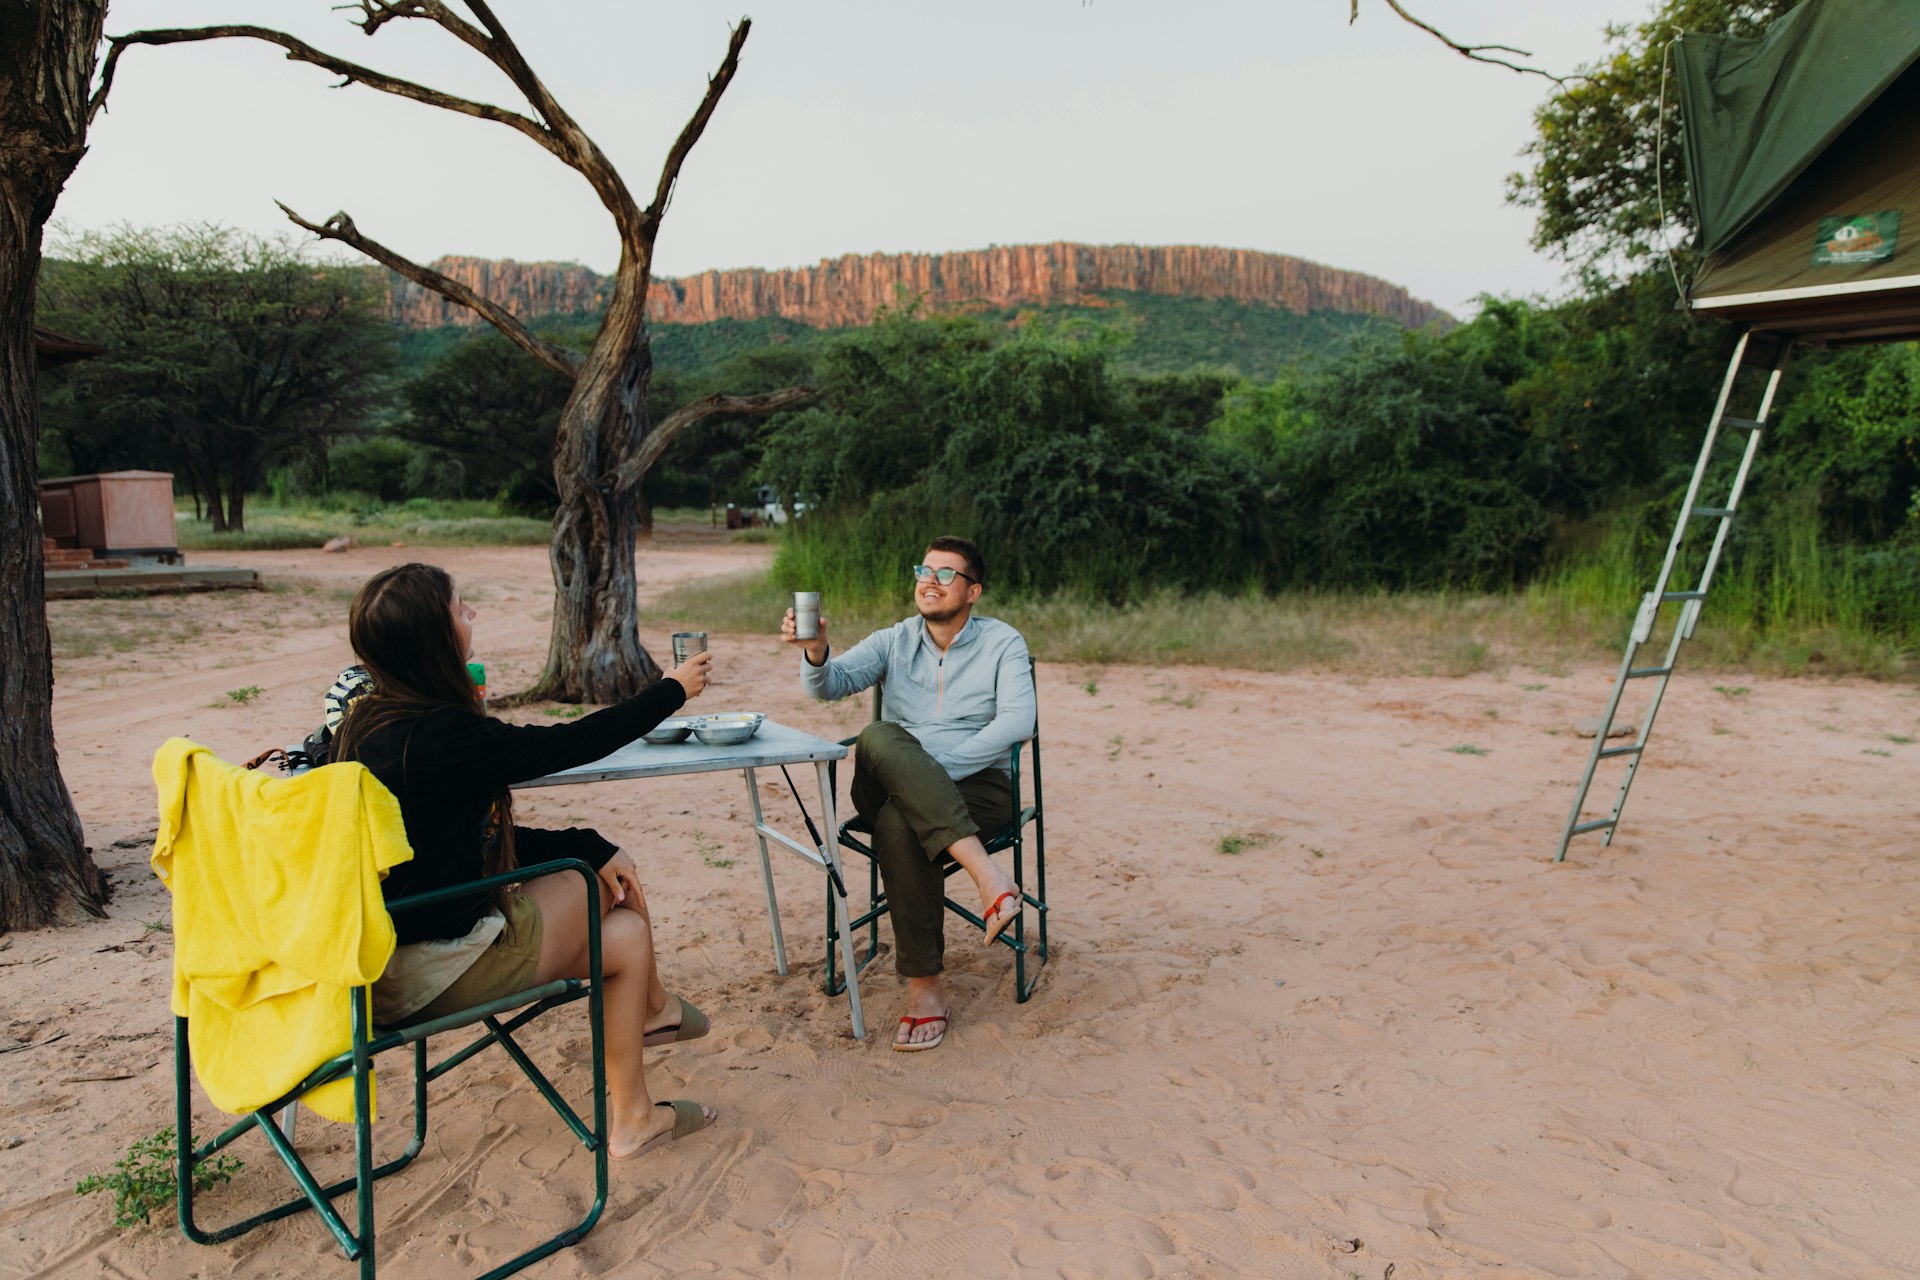 Two travelers raise a toast at their campsite in Namibia